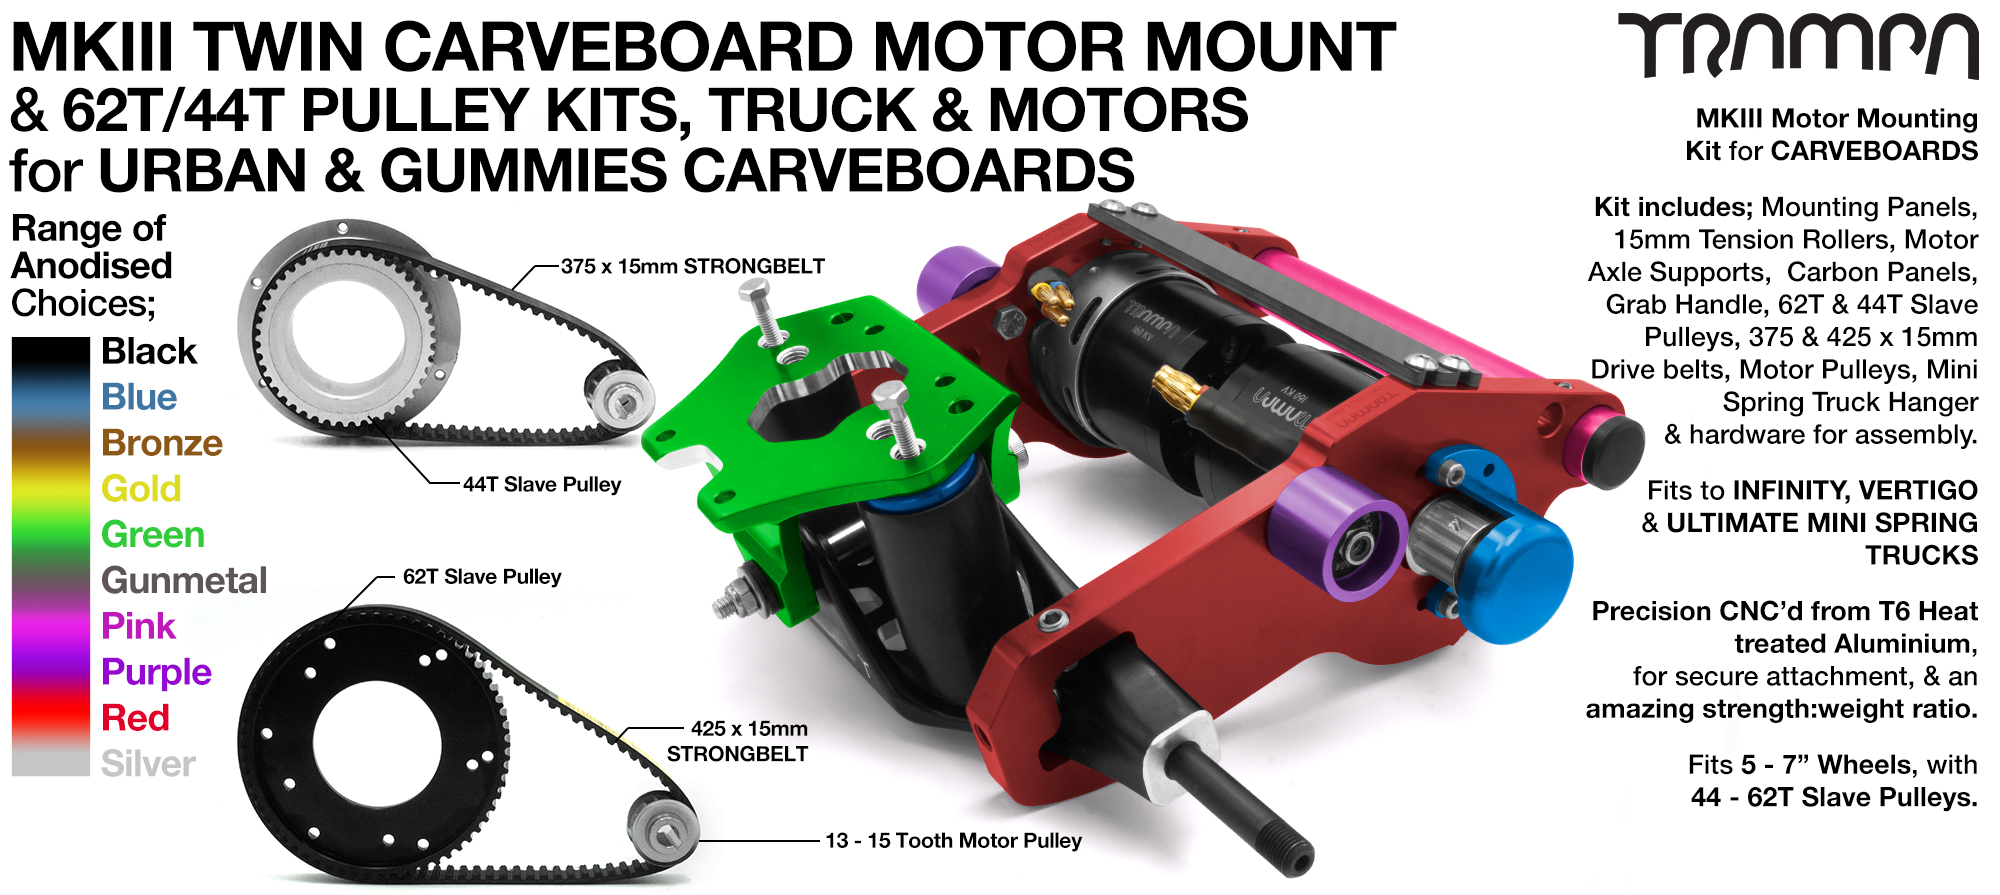 MkIII 2in1 CARVEBOARD Motormount on a TRUCK with 44 tooth GUMMIES & 62 tooth URBAN Pulley kits & TRAMPA Motor - TWIN